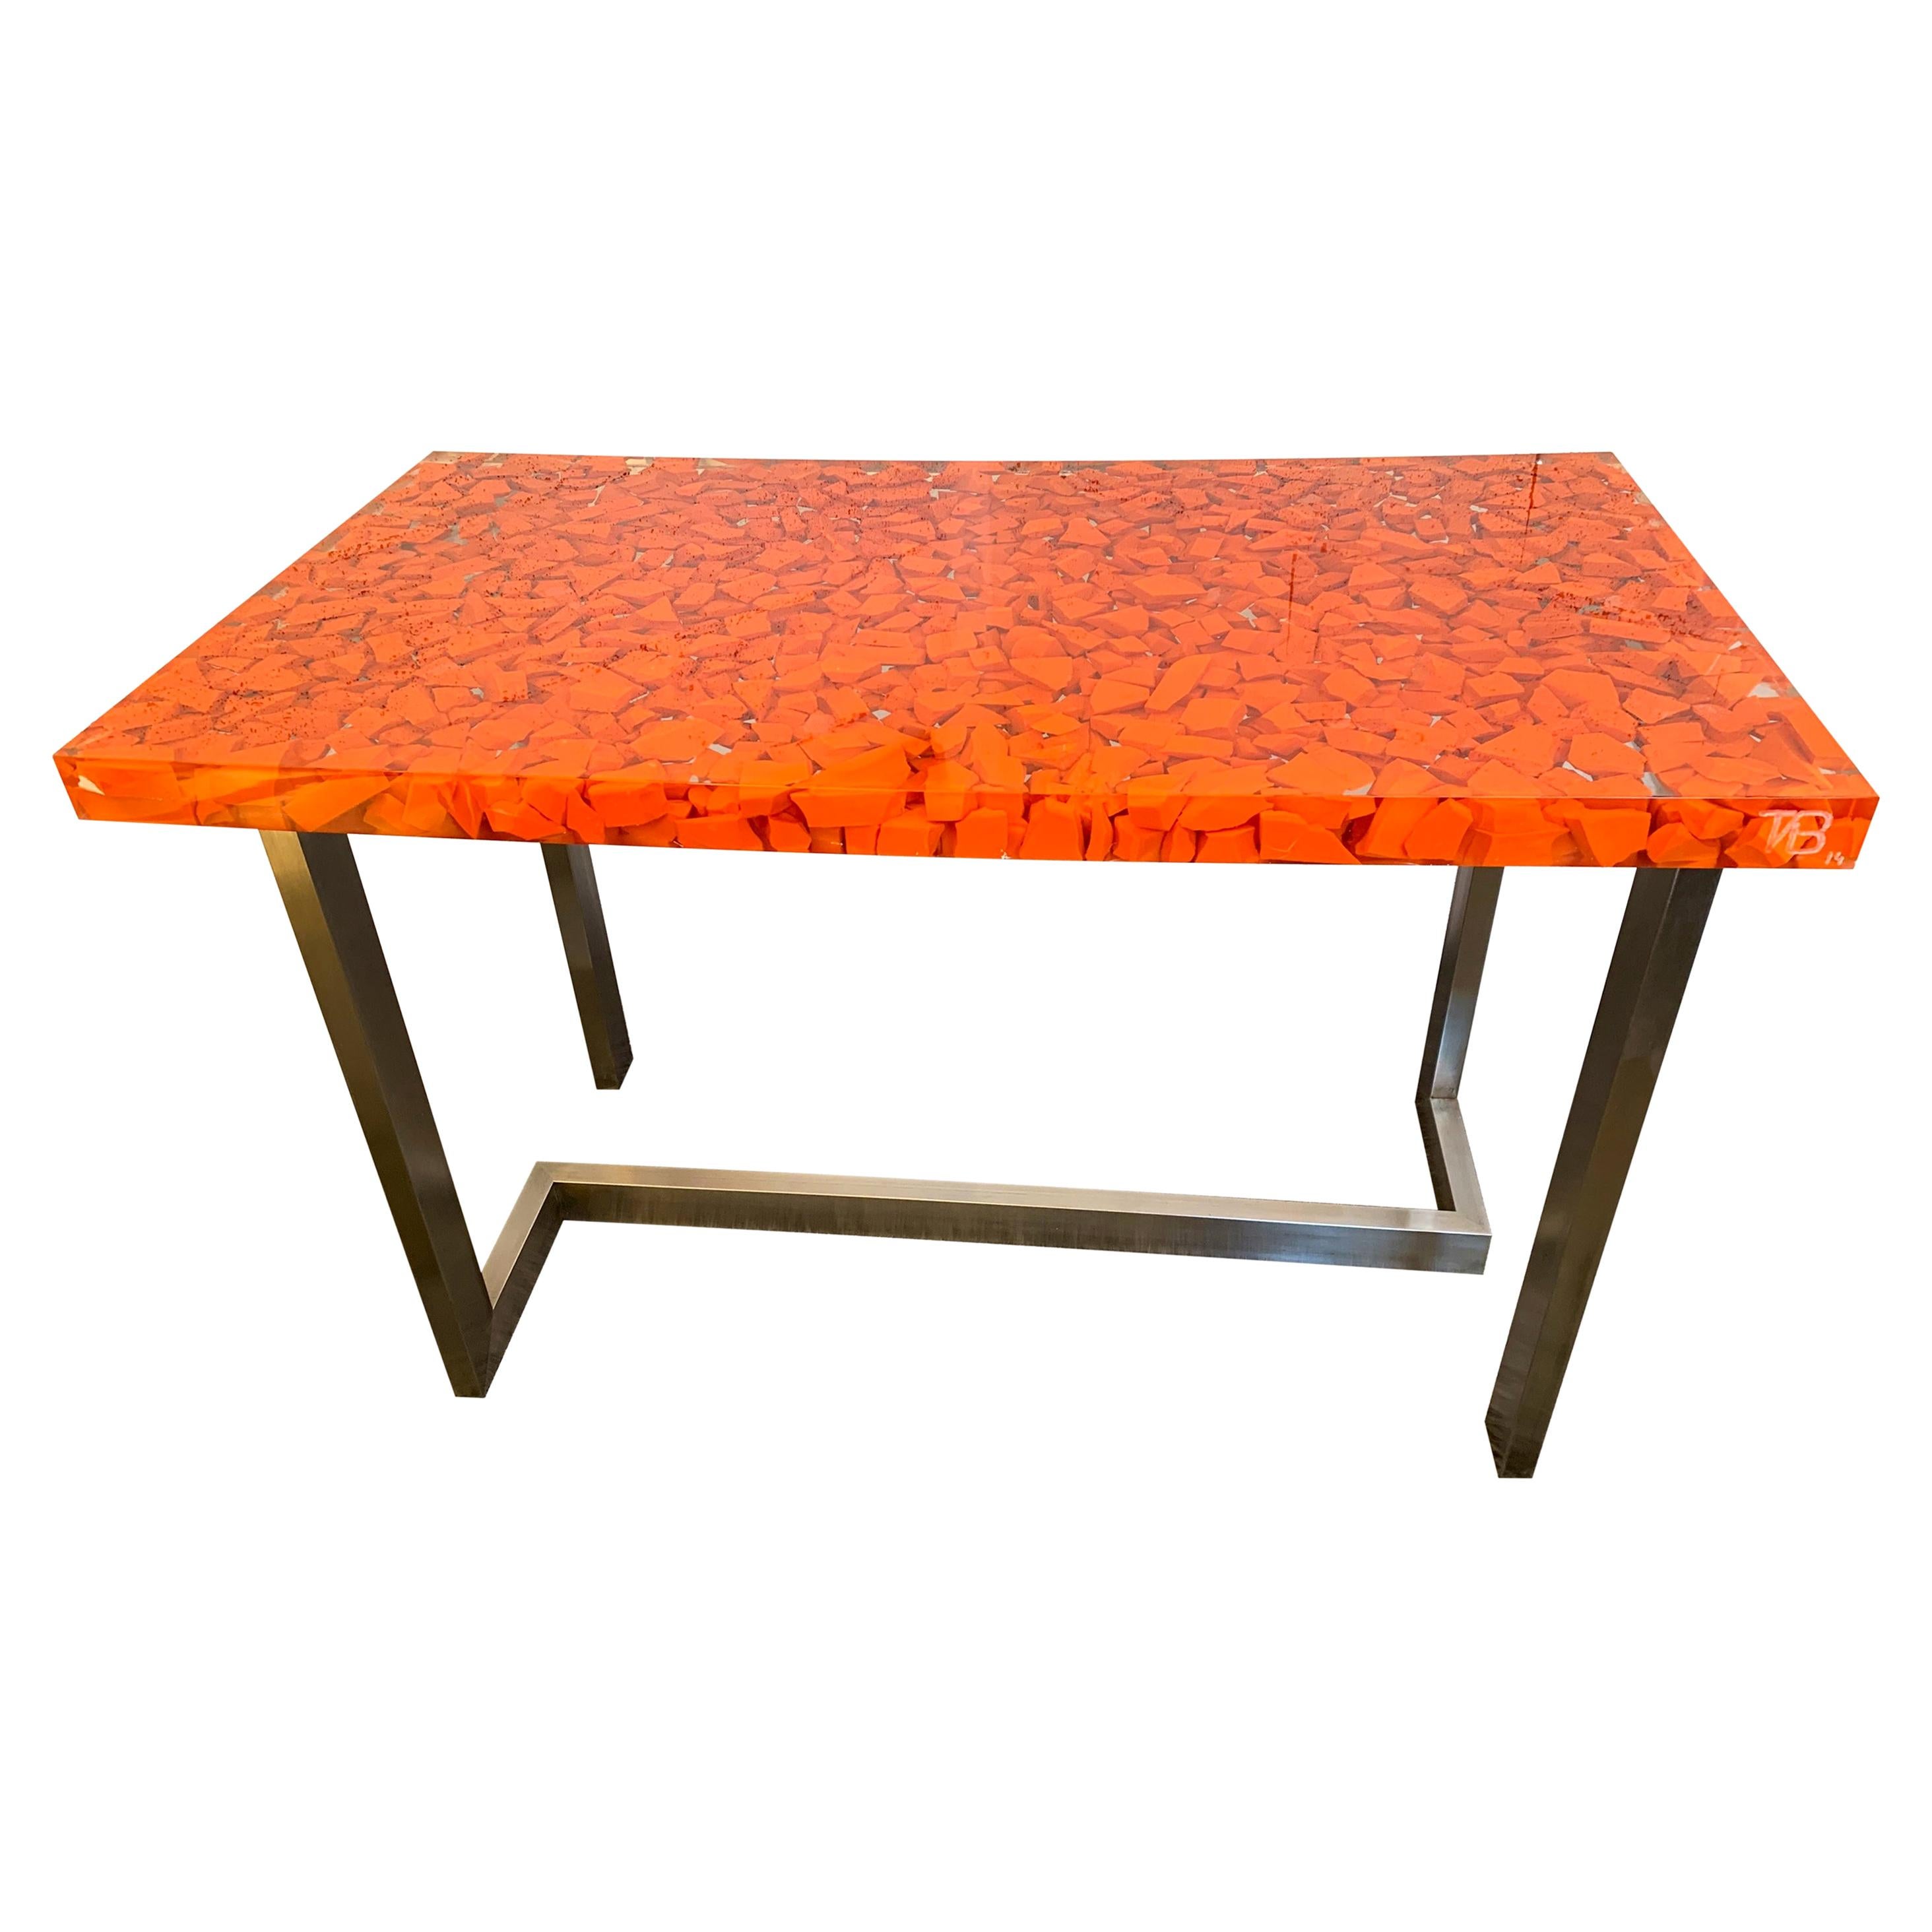 Resin Fractal Inclusion Console Table Desk by Thomas Brant, France, 2014